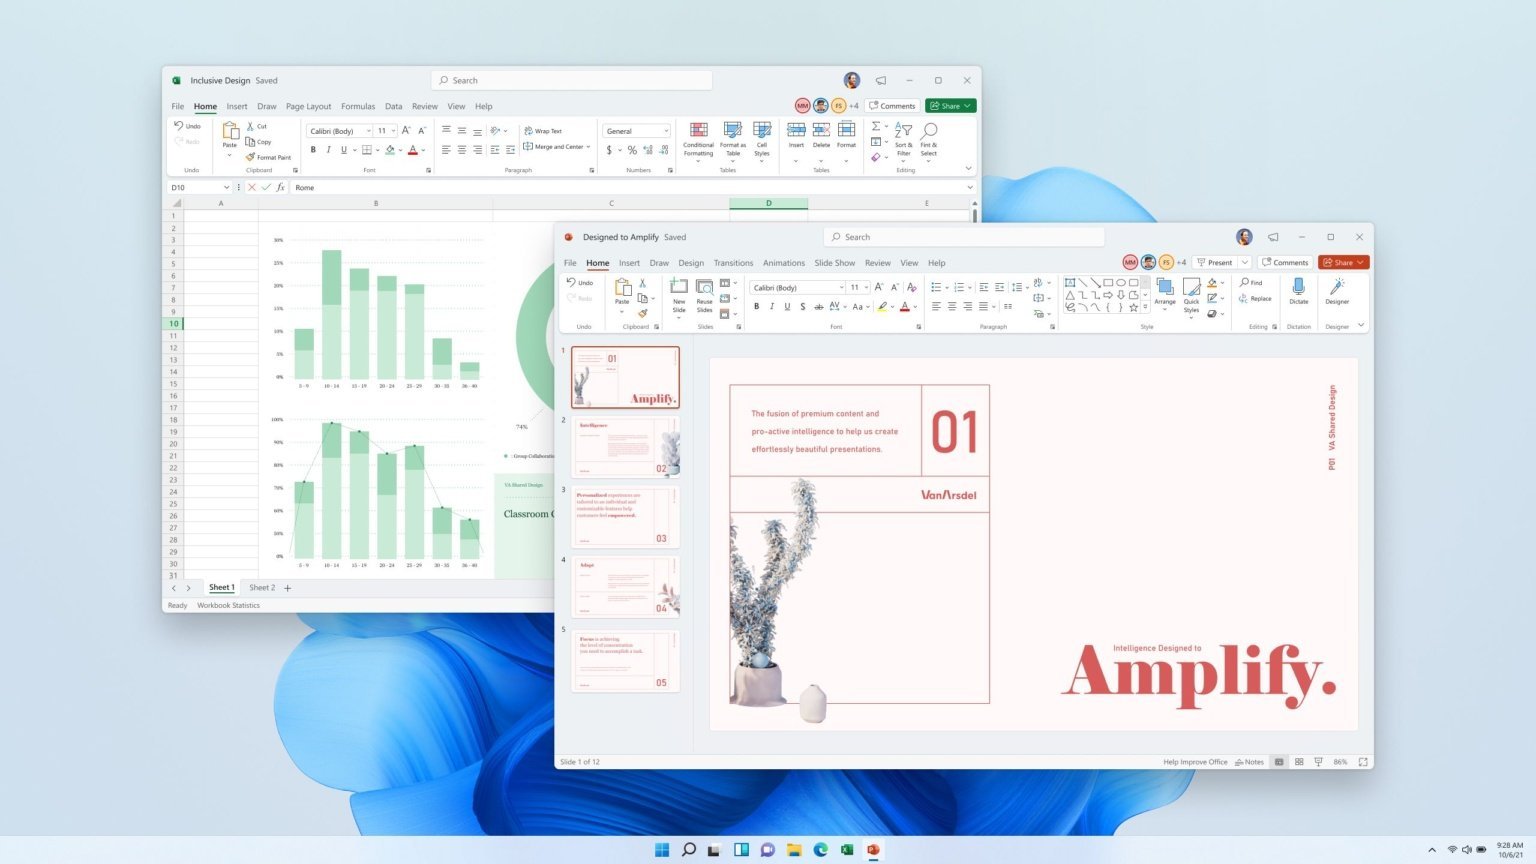 Microsoft begins to implement updated user interface for Office programs